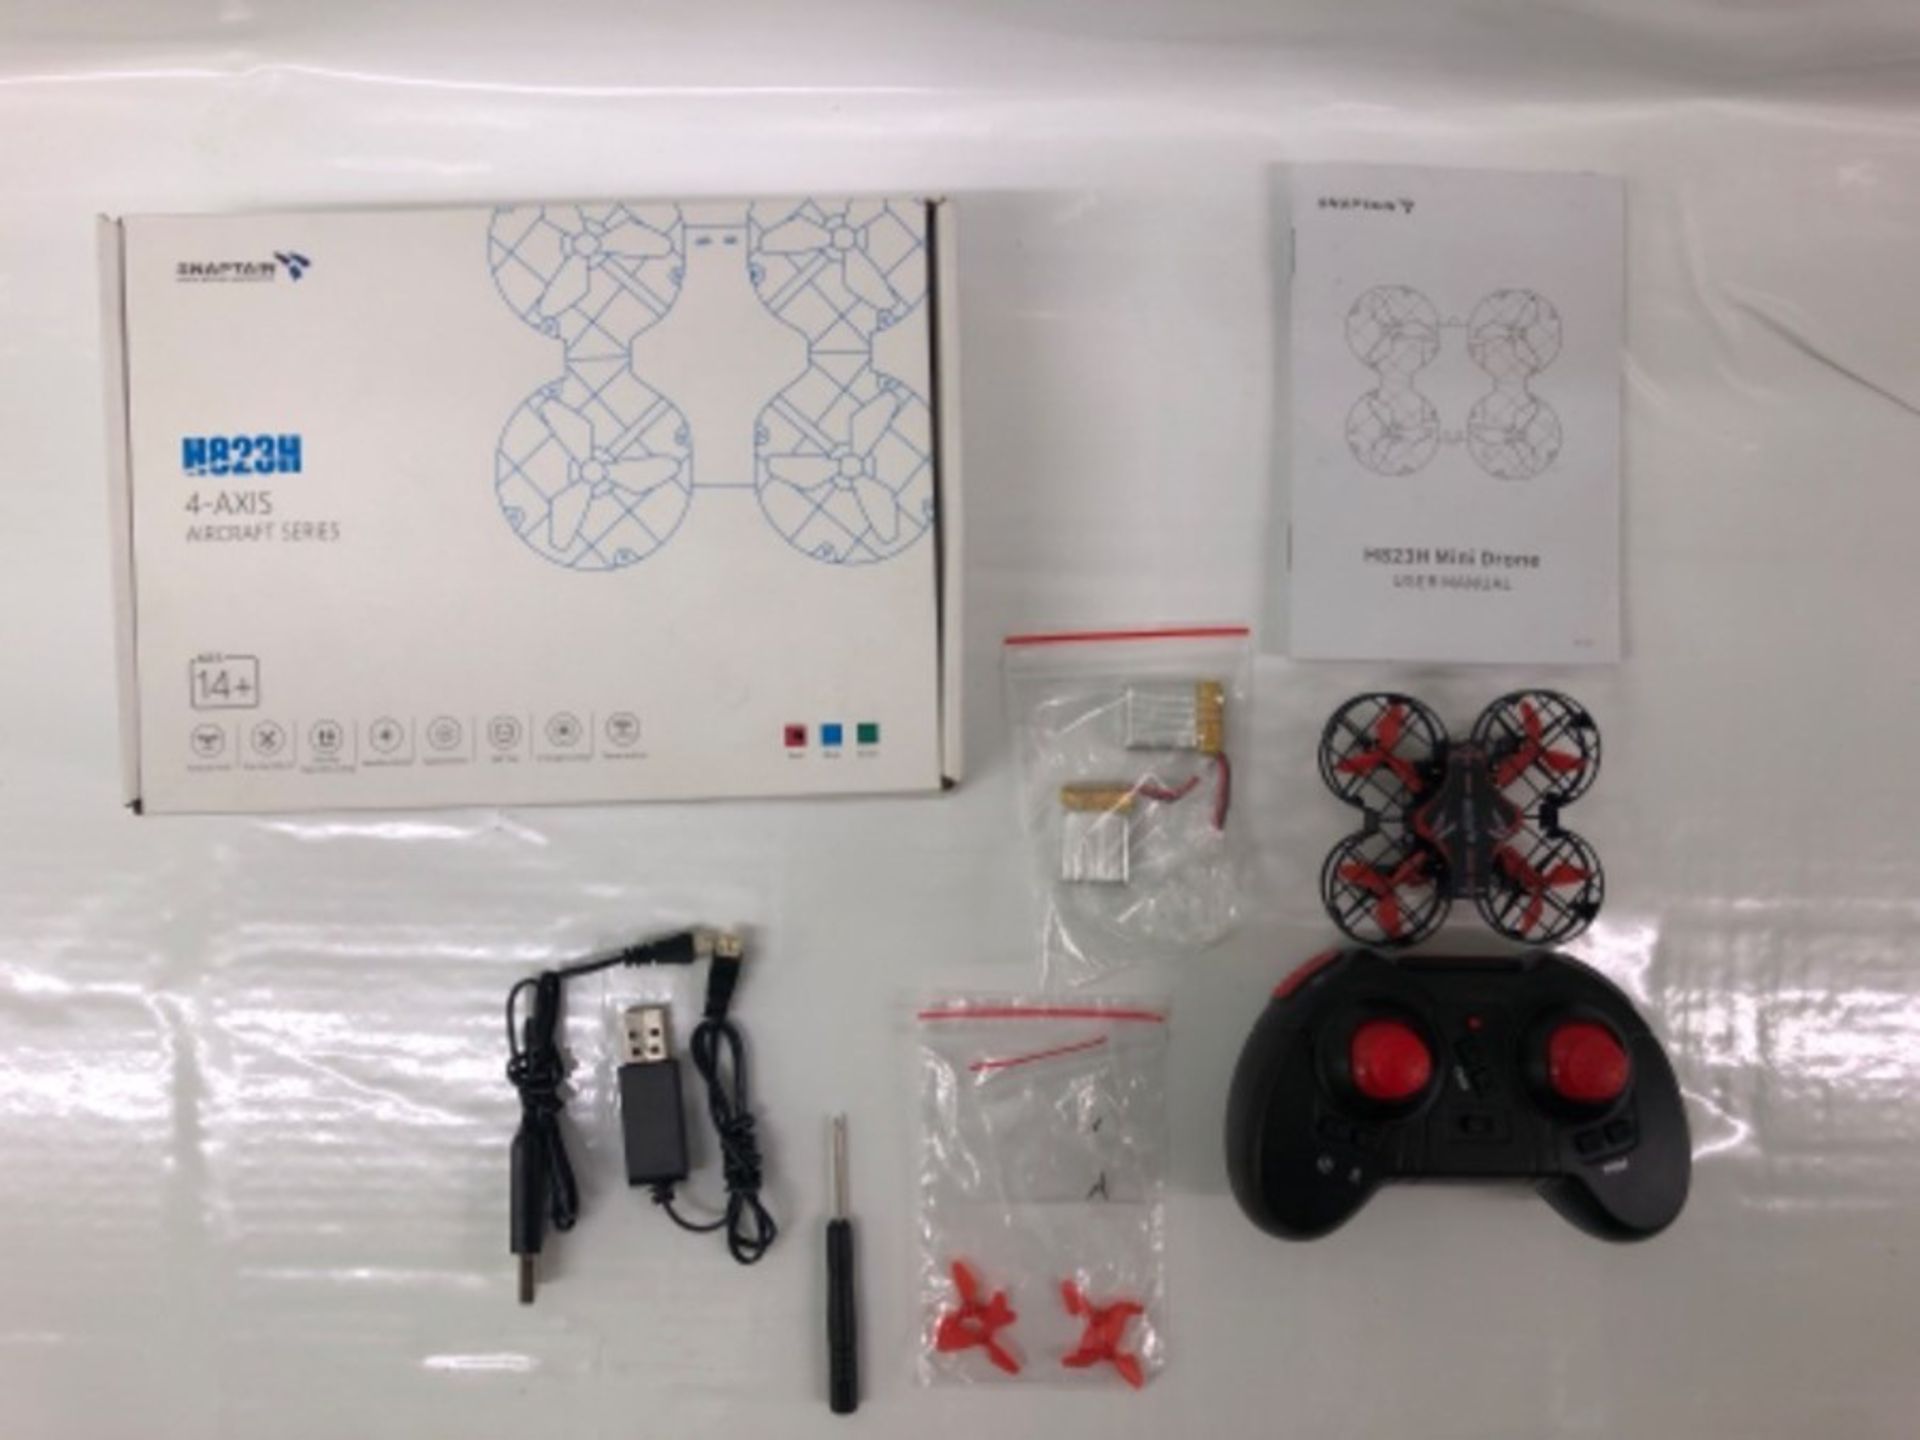 SNAPTAIN H823H Mini Drone for Kids and Beginners, 2.4G Remote Control Quadcopter with - Image 3 of 3